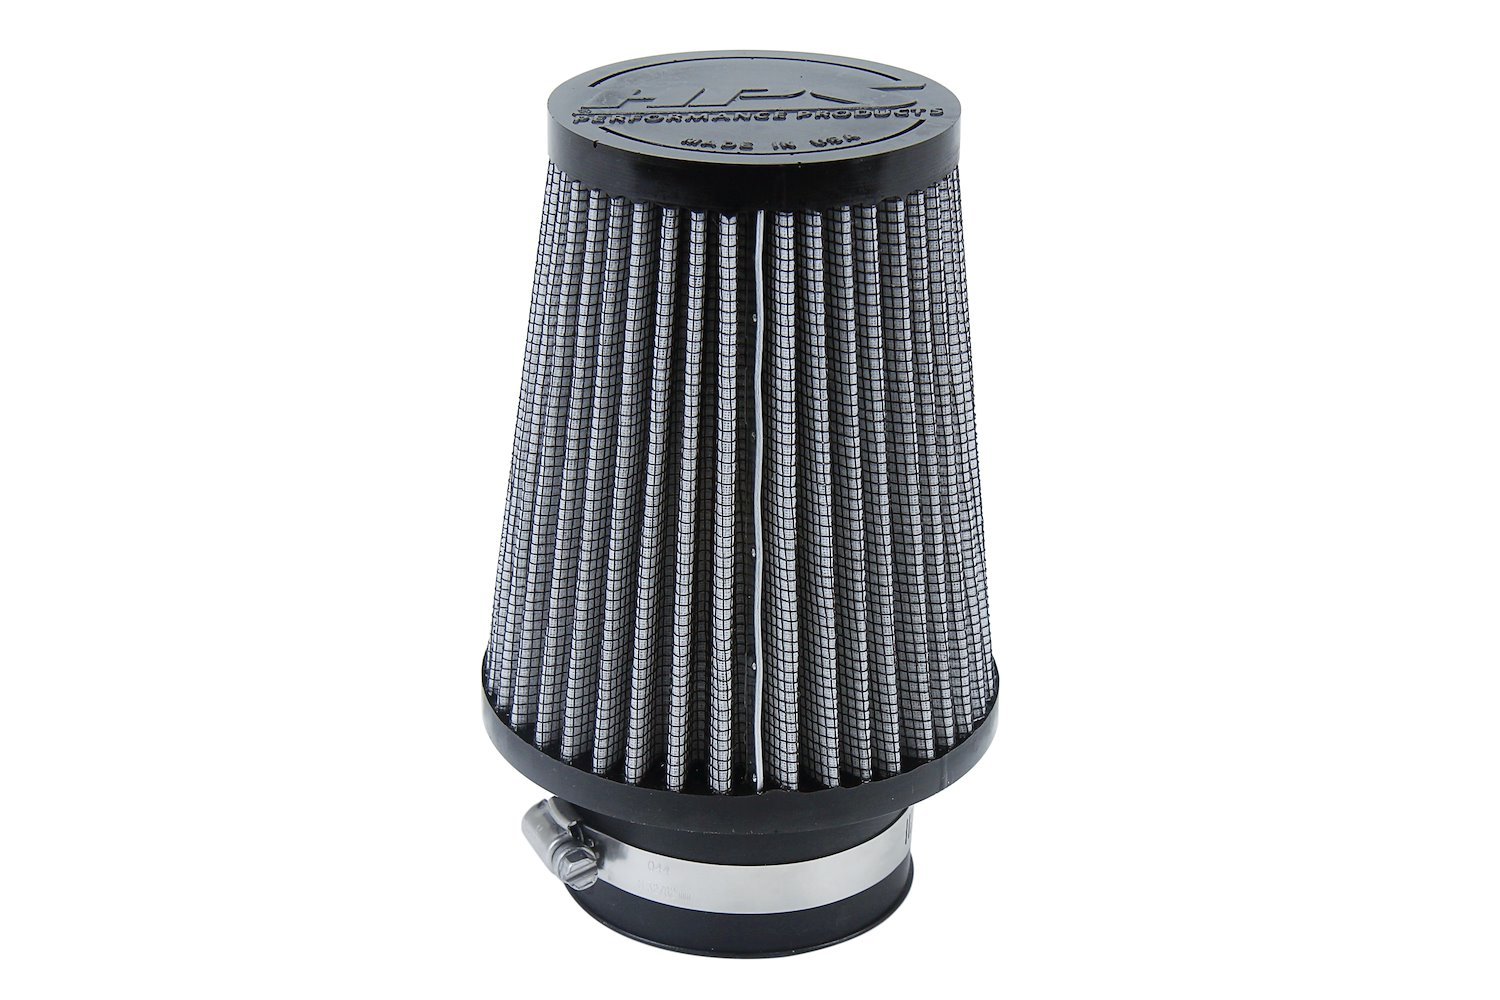 HPS-4296 Performance Air Filter, 2-3/4 in. Flange ID, 7-1/2 in. Height, Pre-Oiled & Reusable.